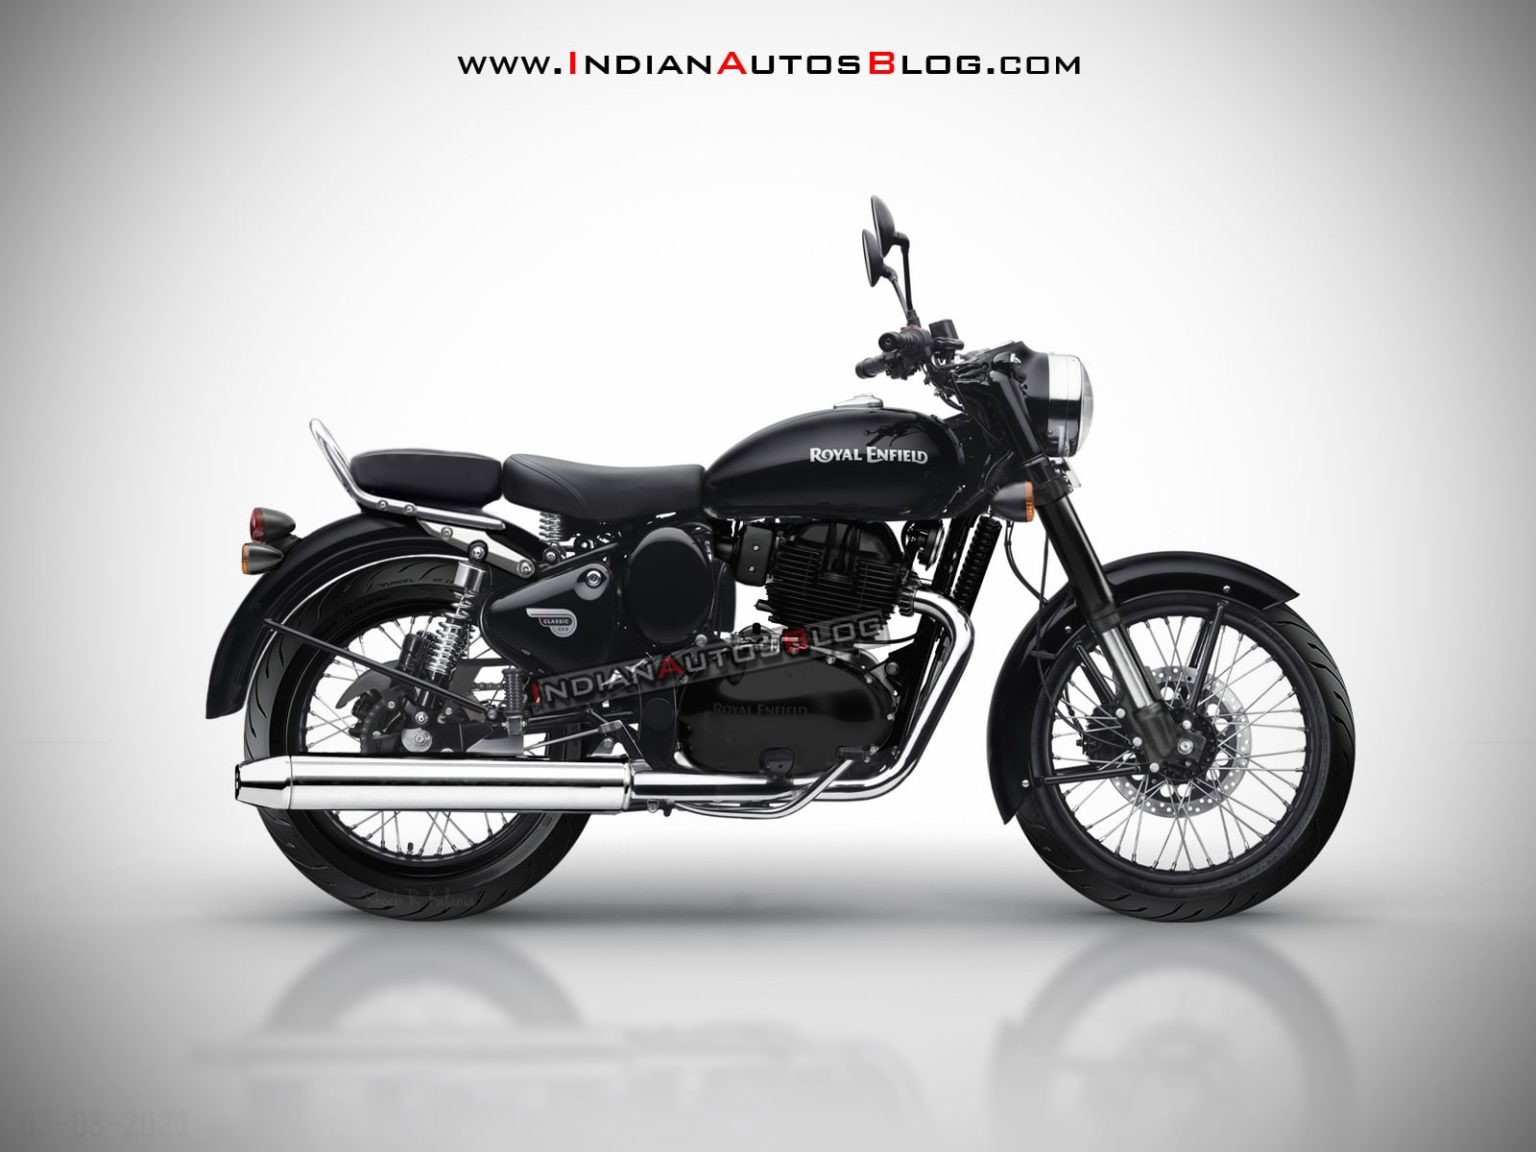 Royal Enfield Classic 650 Could Look Like This